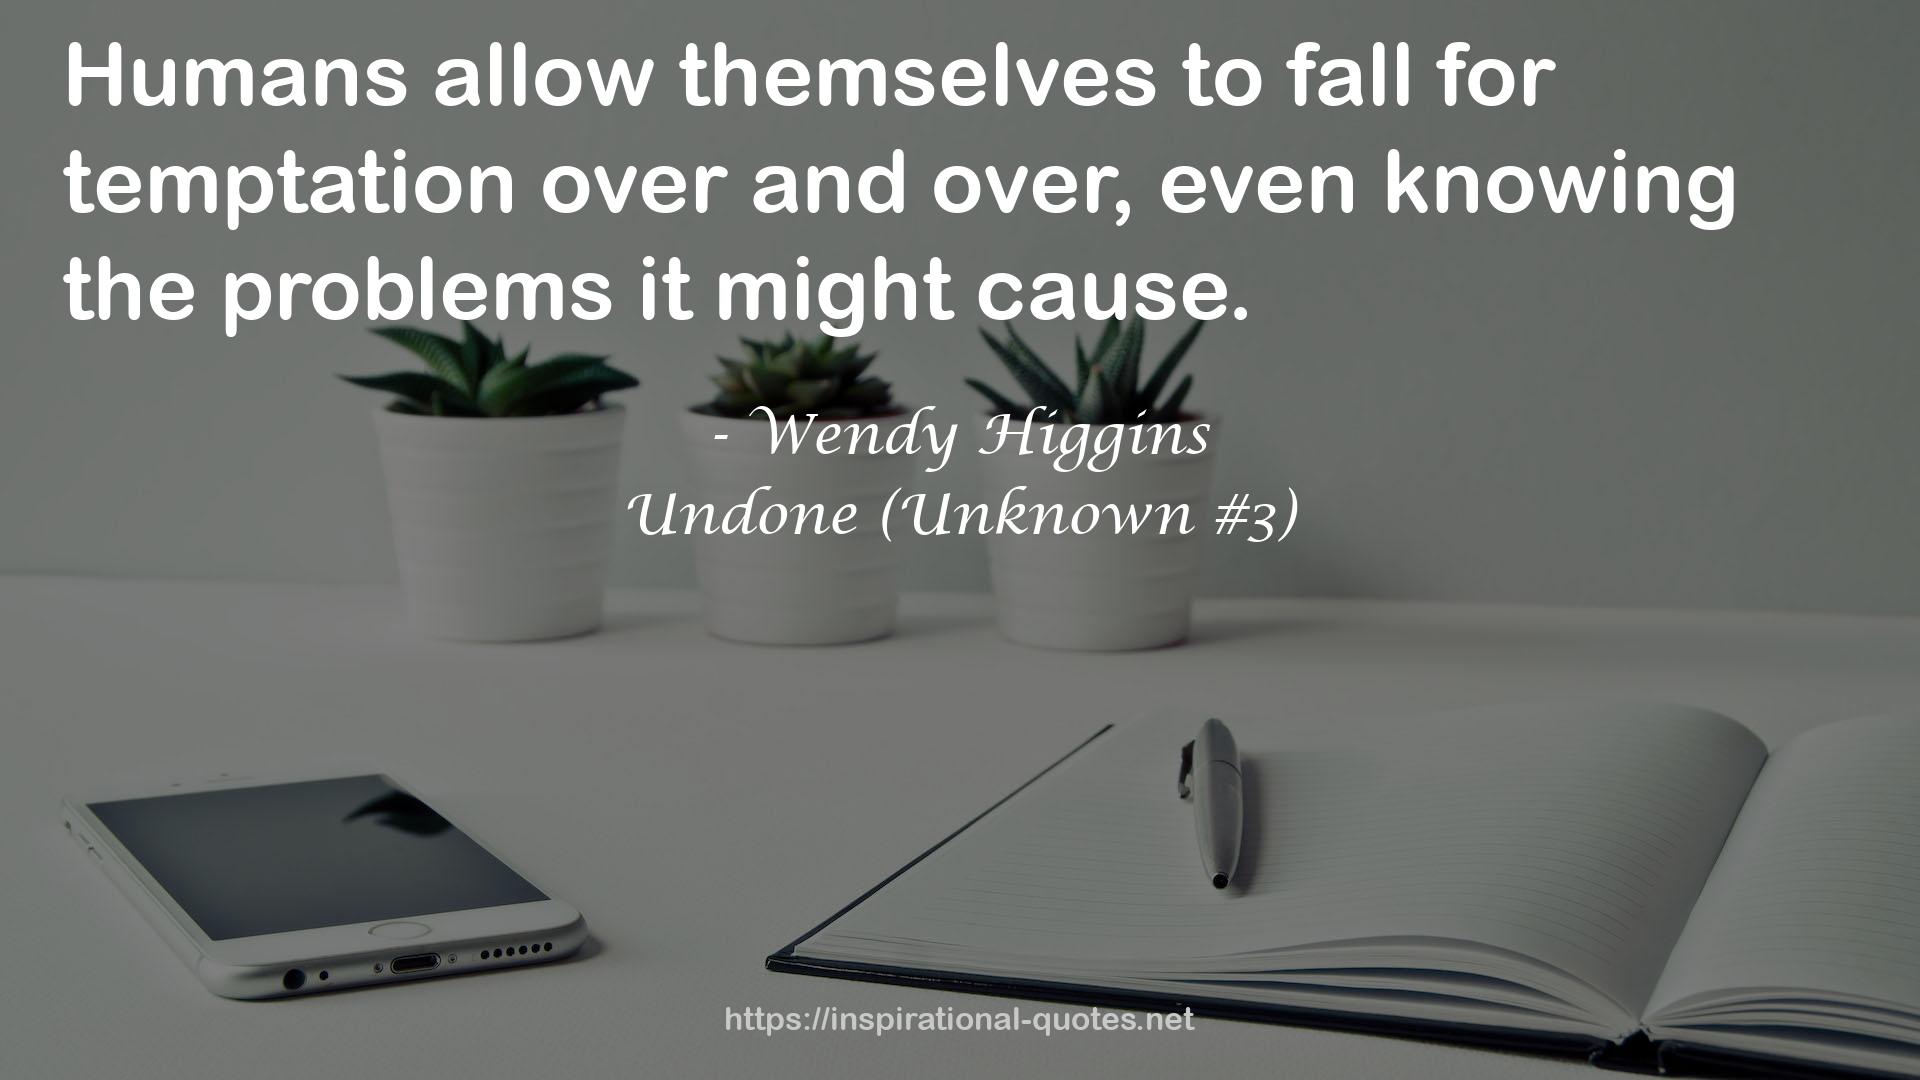 Undone (Unknown #3) QUOTES